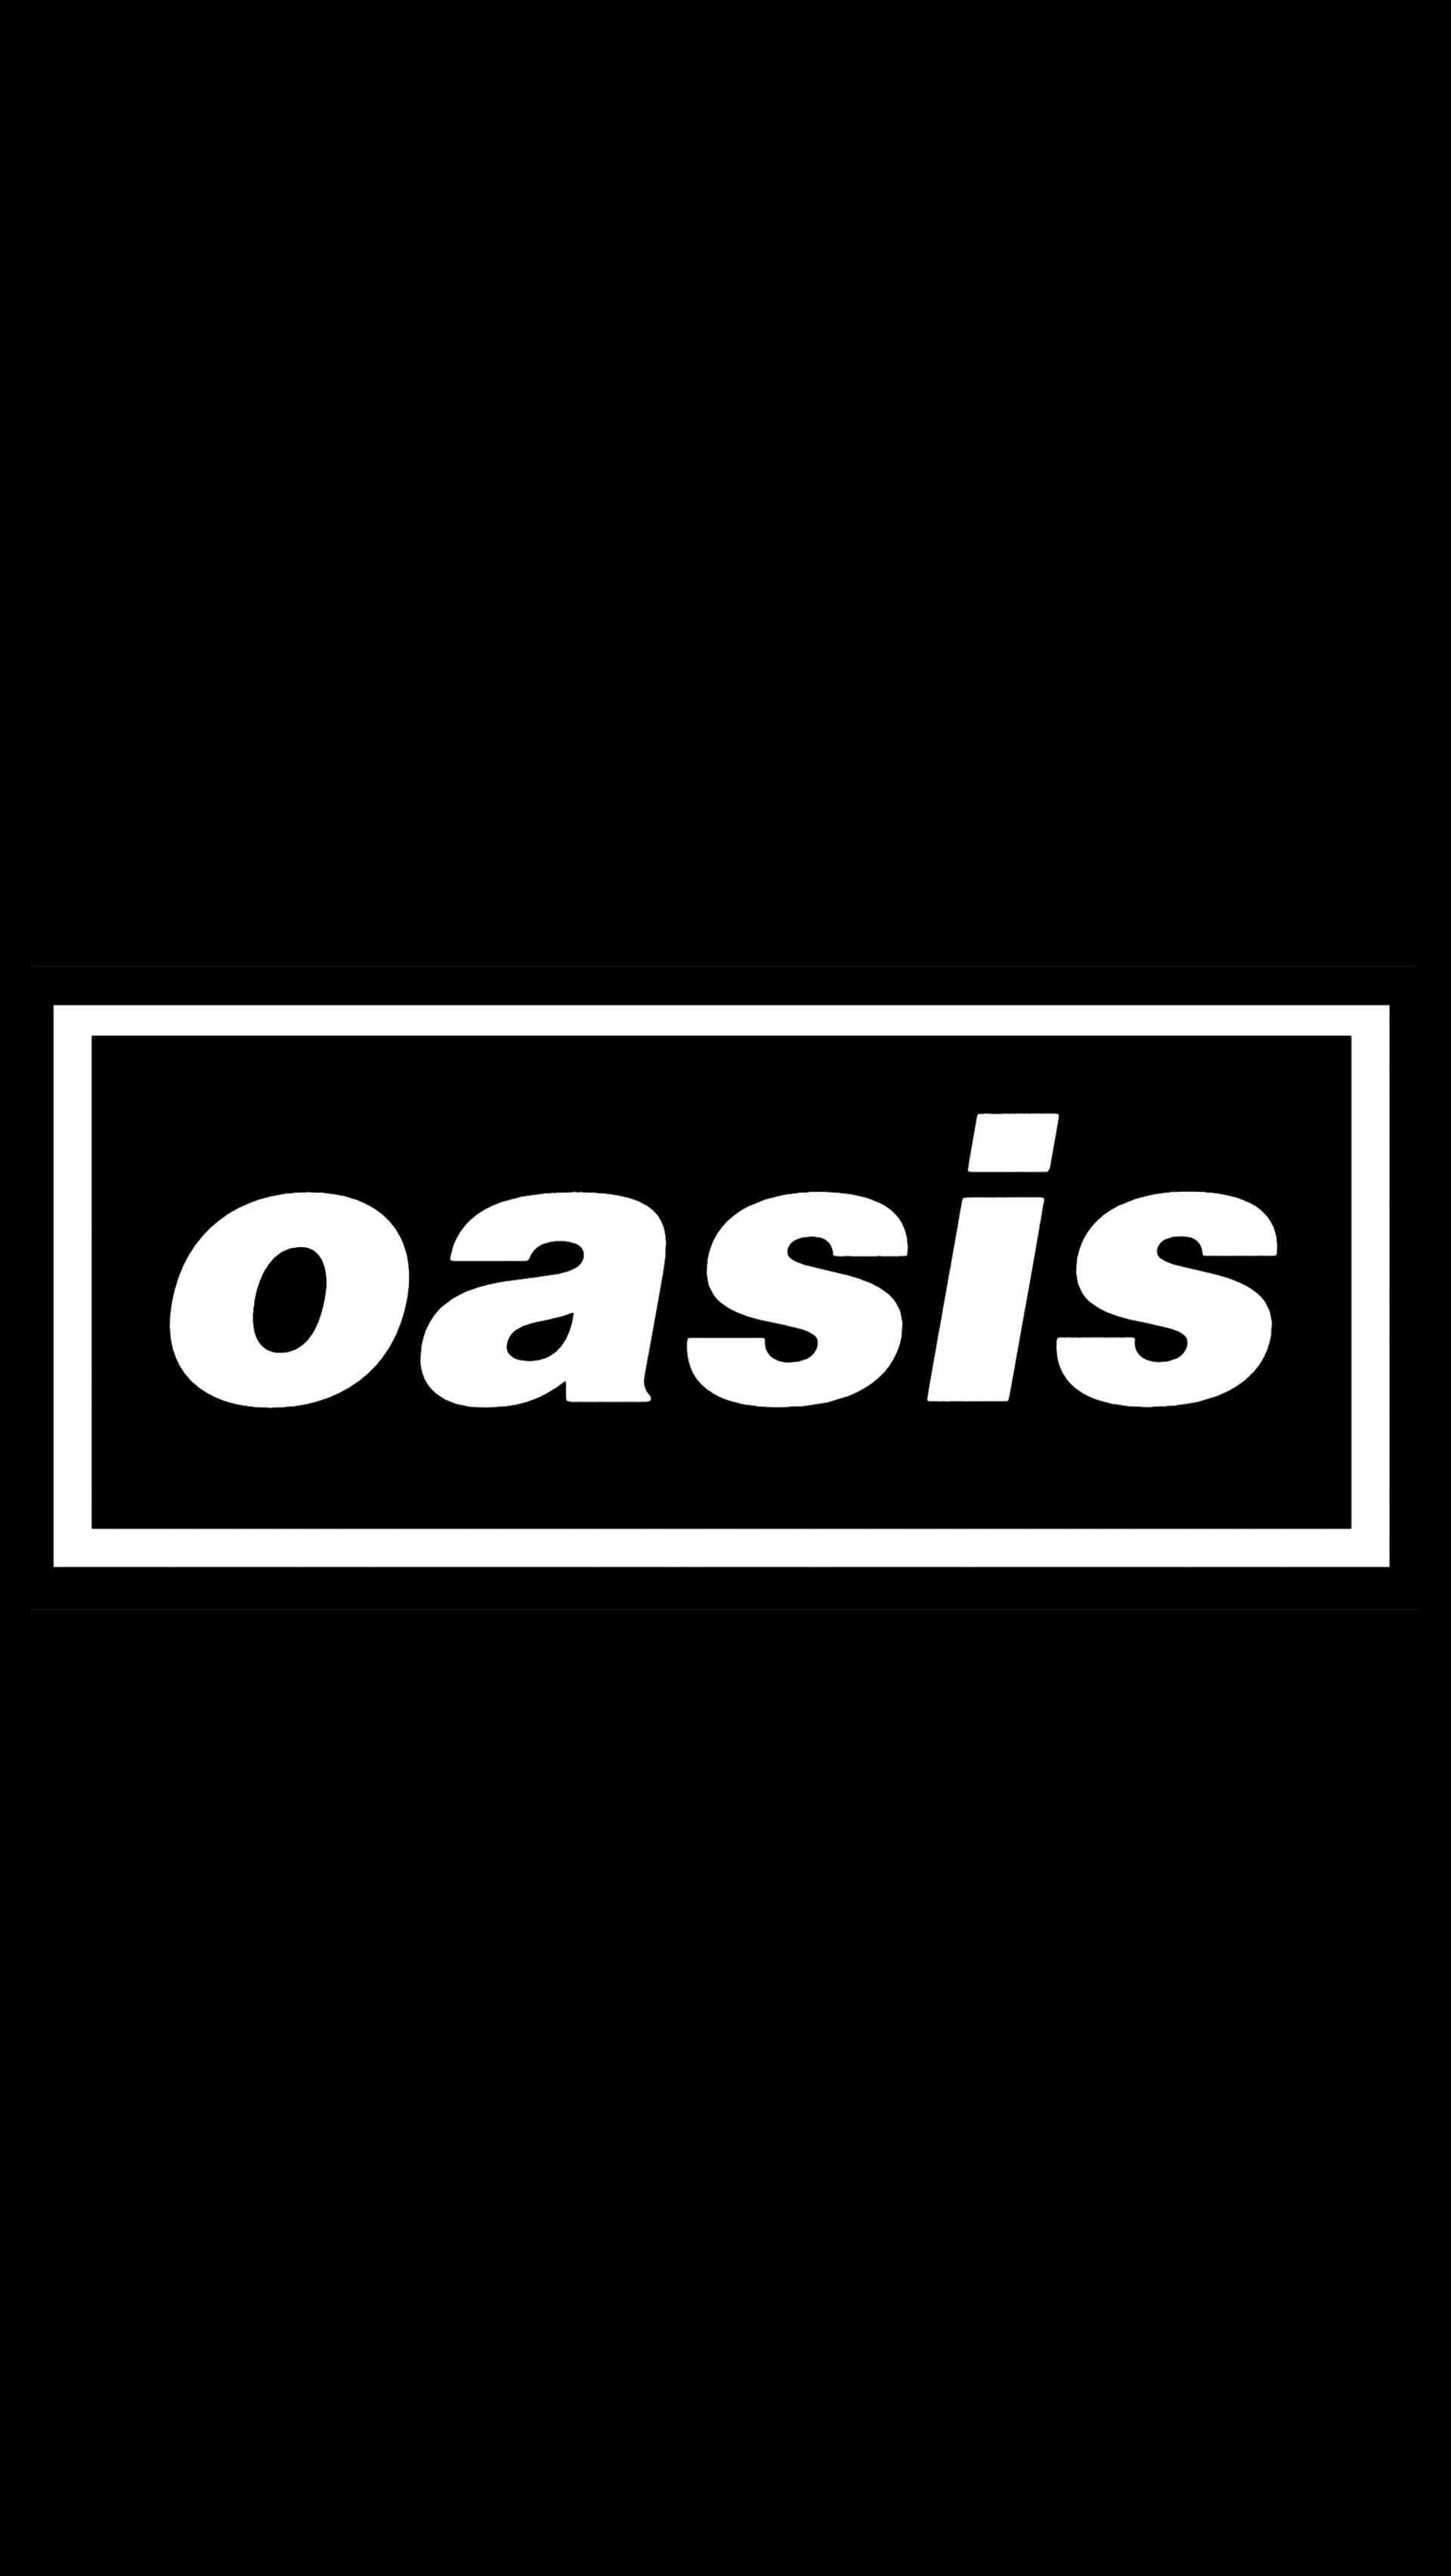 Oasis Iphone Wallpapers Wallpaper Cave